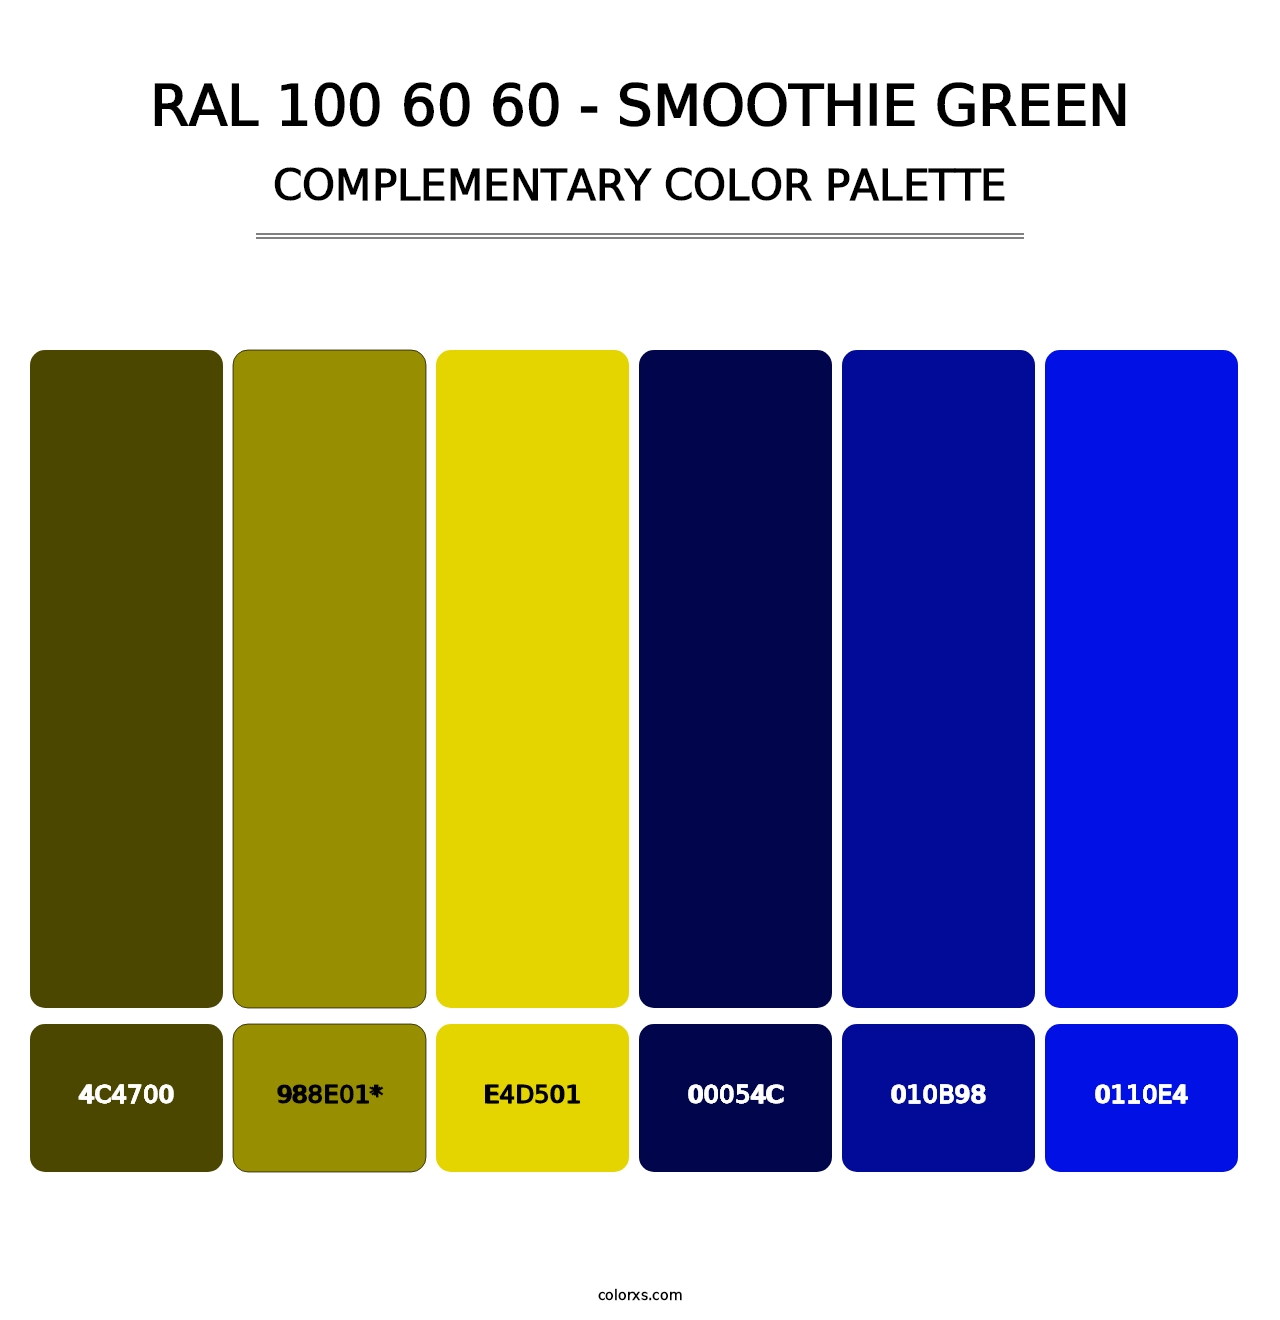 RAL 100 60 60 - Smoothie Green - Complementary Color Palette